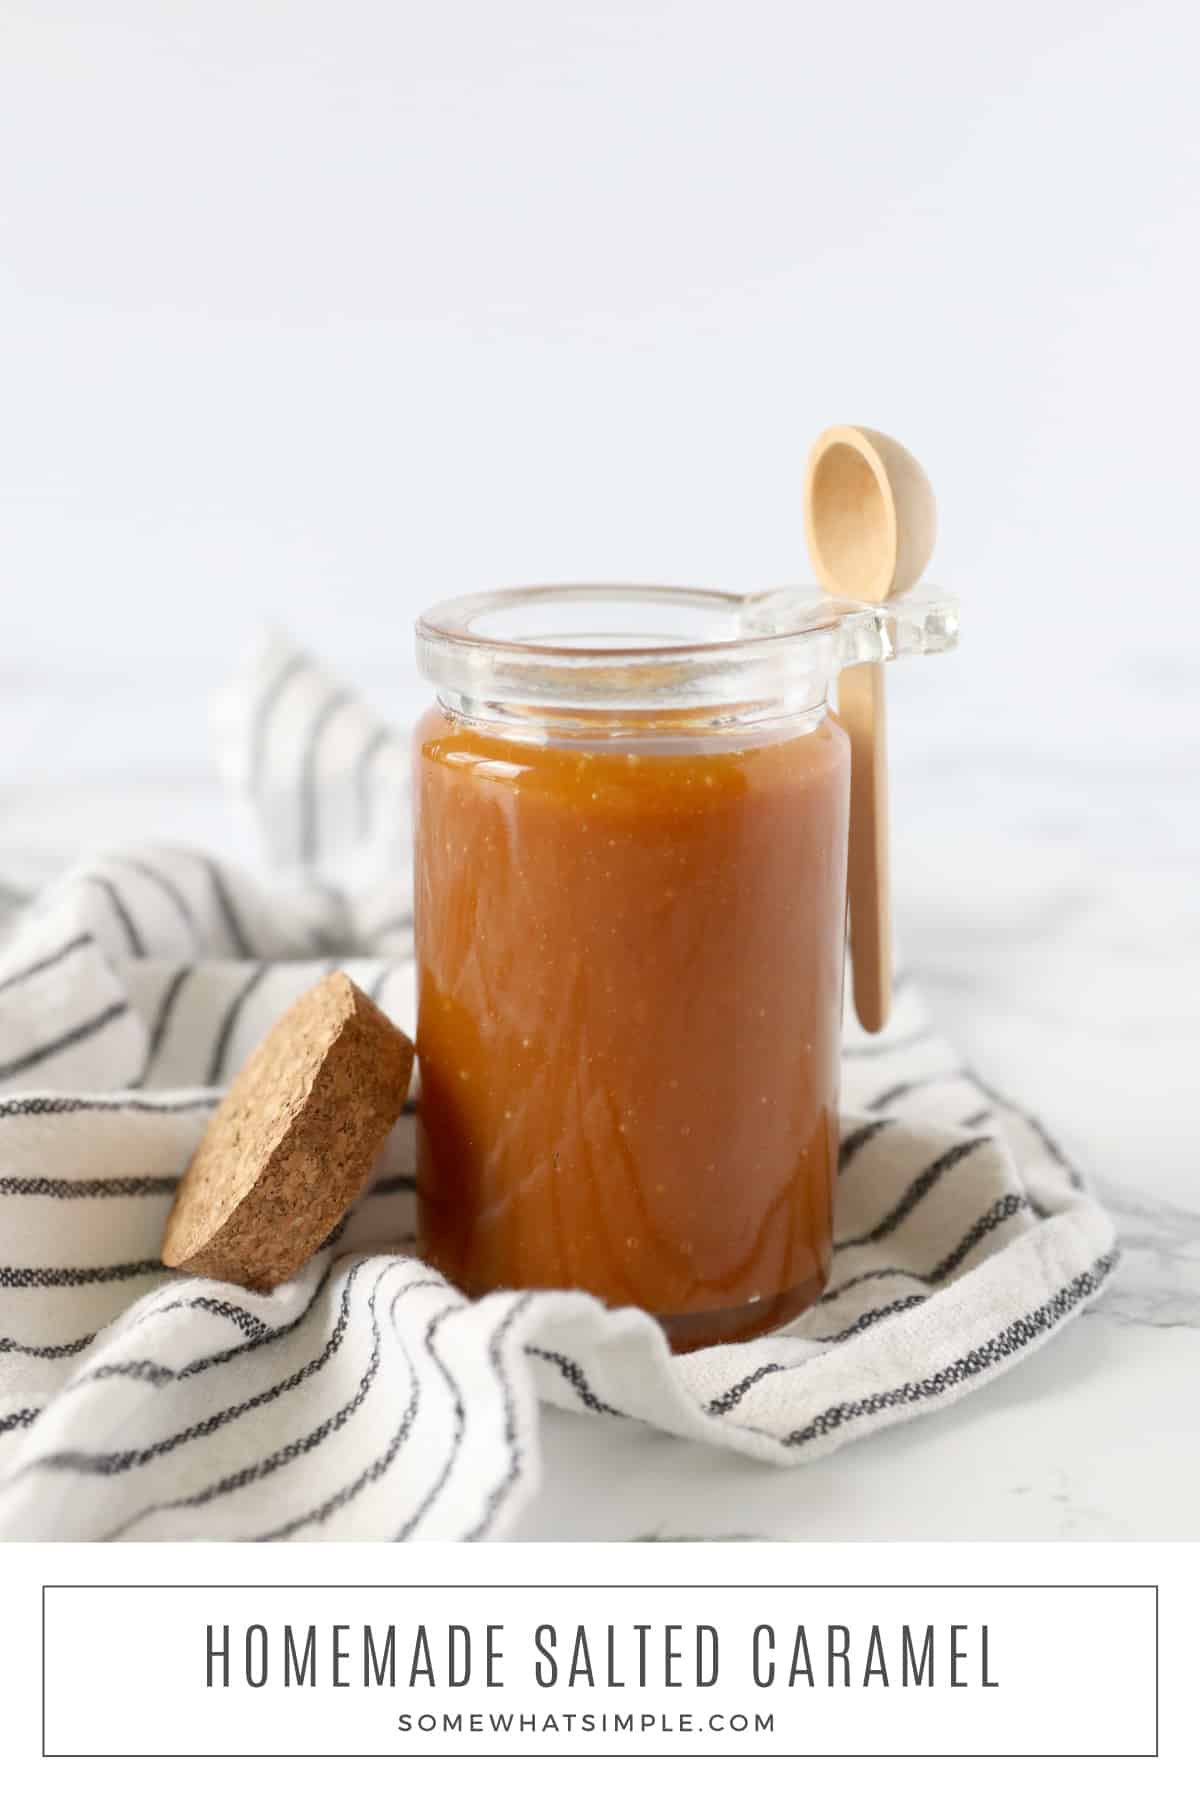 Add a salty-sweet flavor to ice cream, oatmeal, toast, and more with this easy salted caramel sauce recipe. via @somewhatsimple